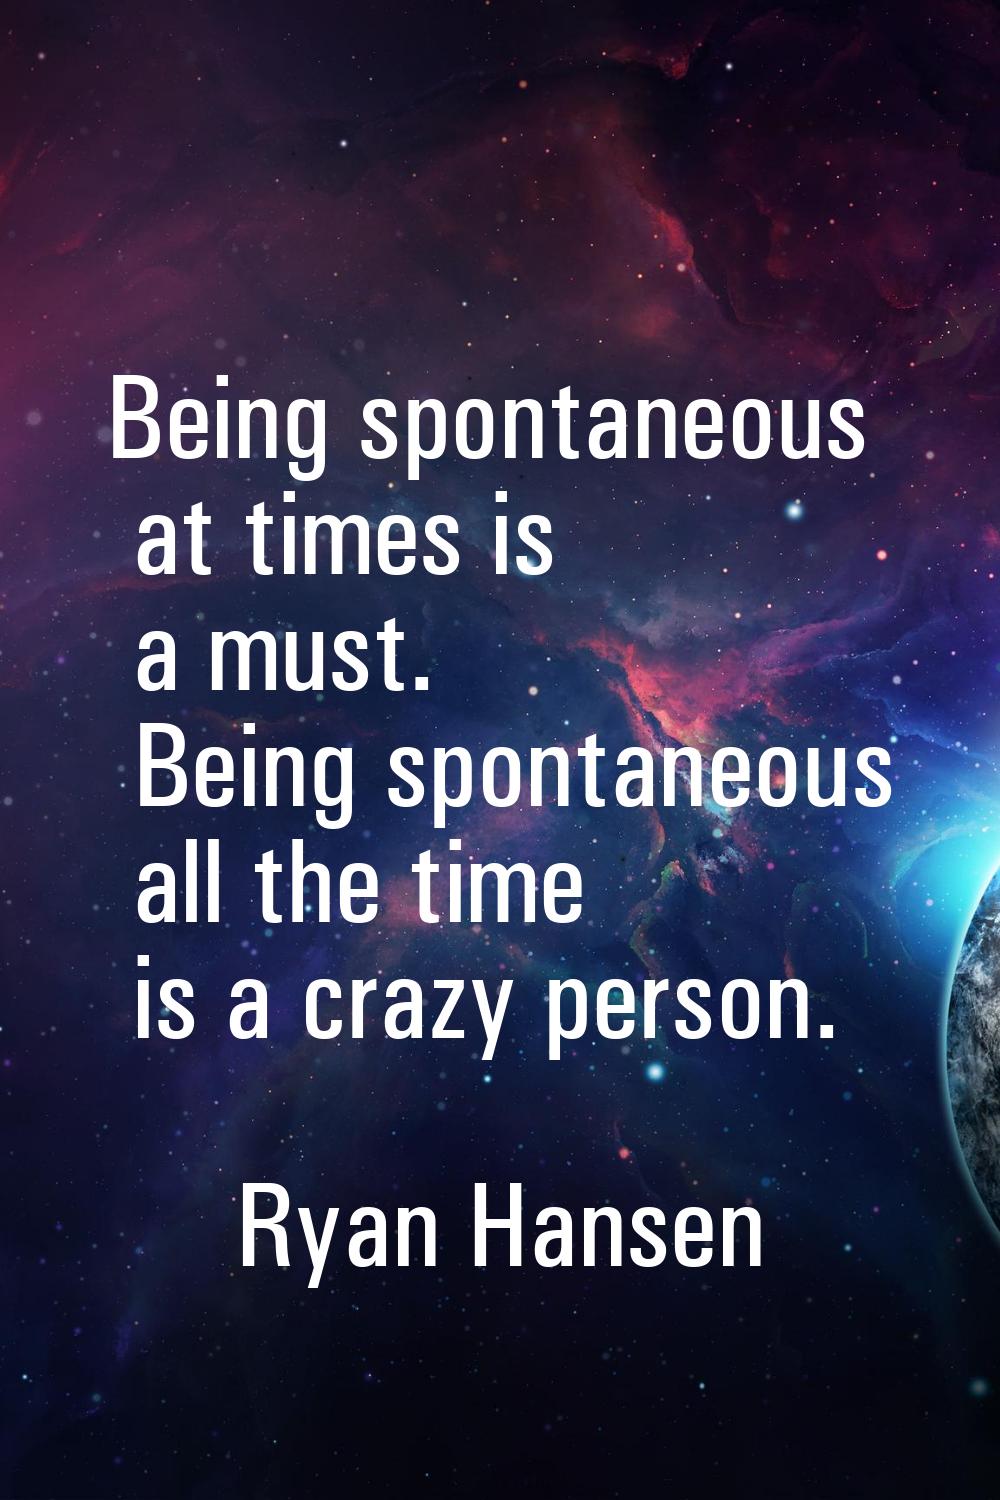 Being spontaneous at times is a must. Being spontaneous all the time is a crazy person.